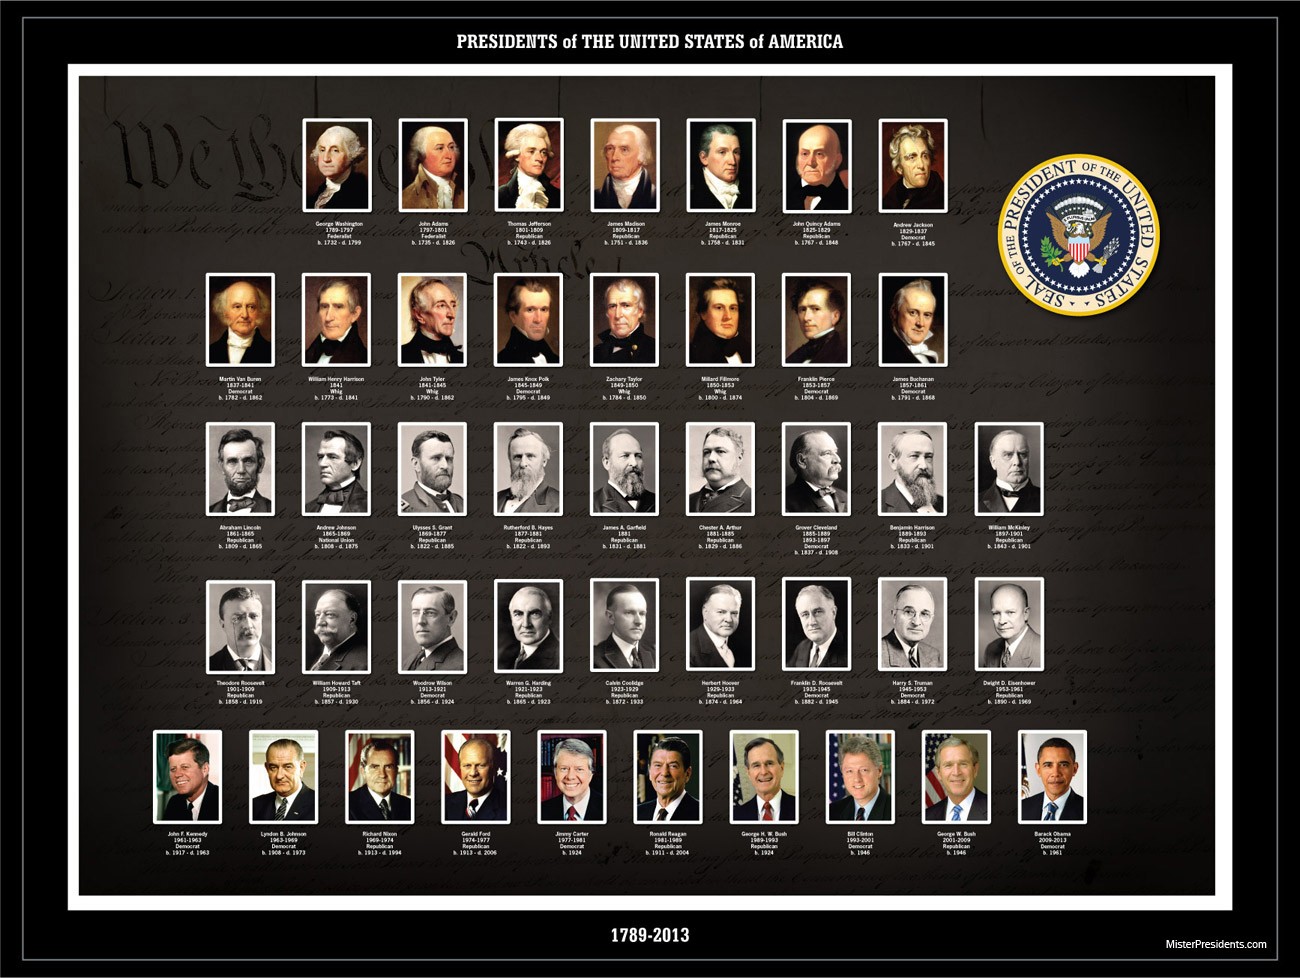 How Many Former Presidents Have Been Alive At The Same Time